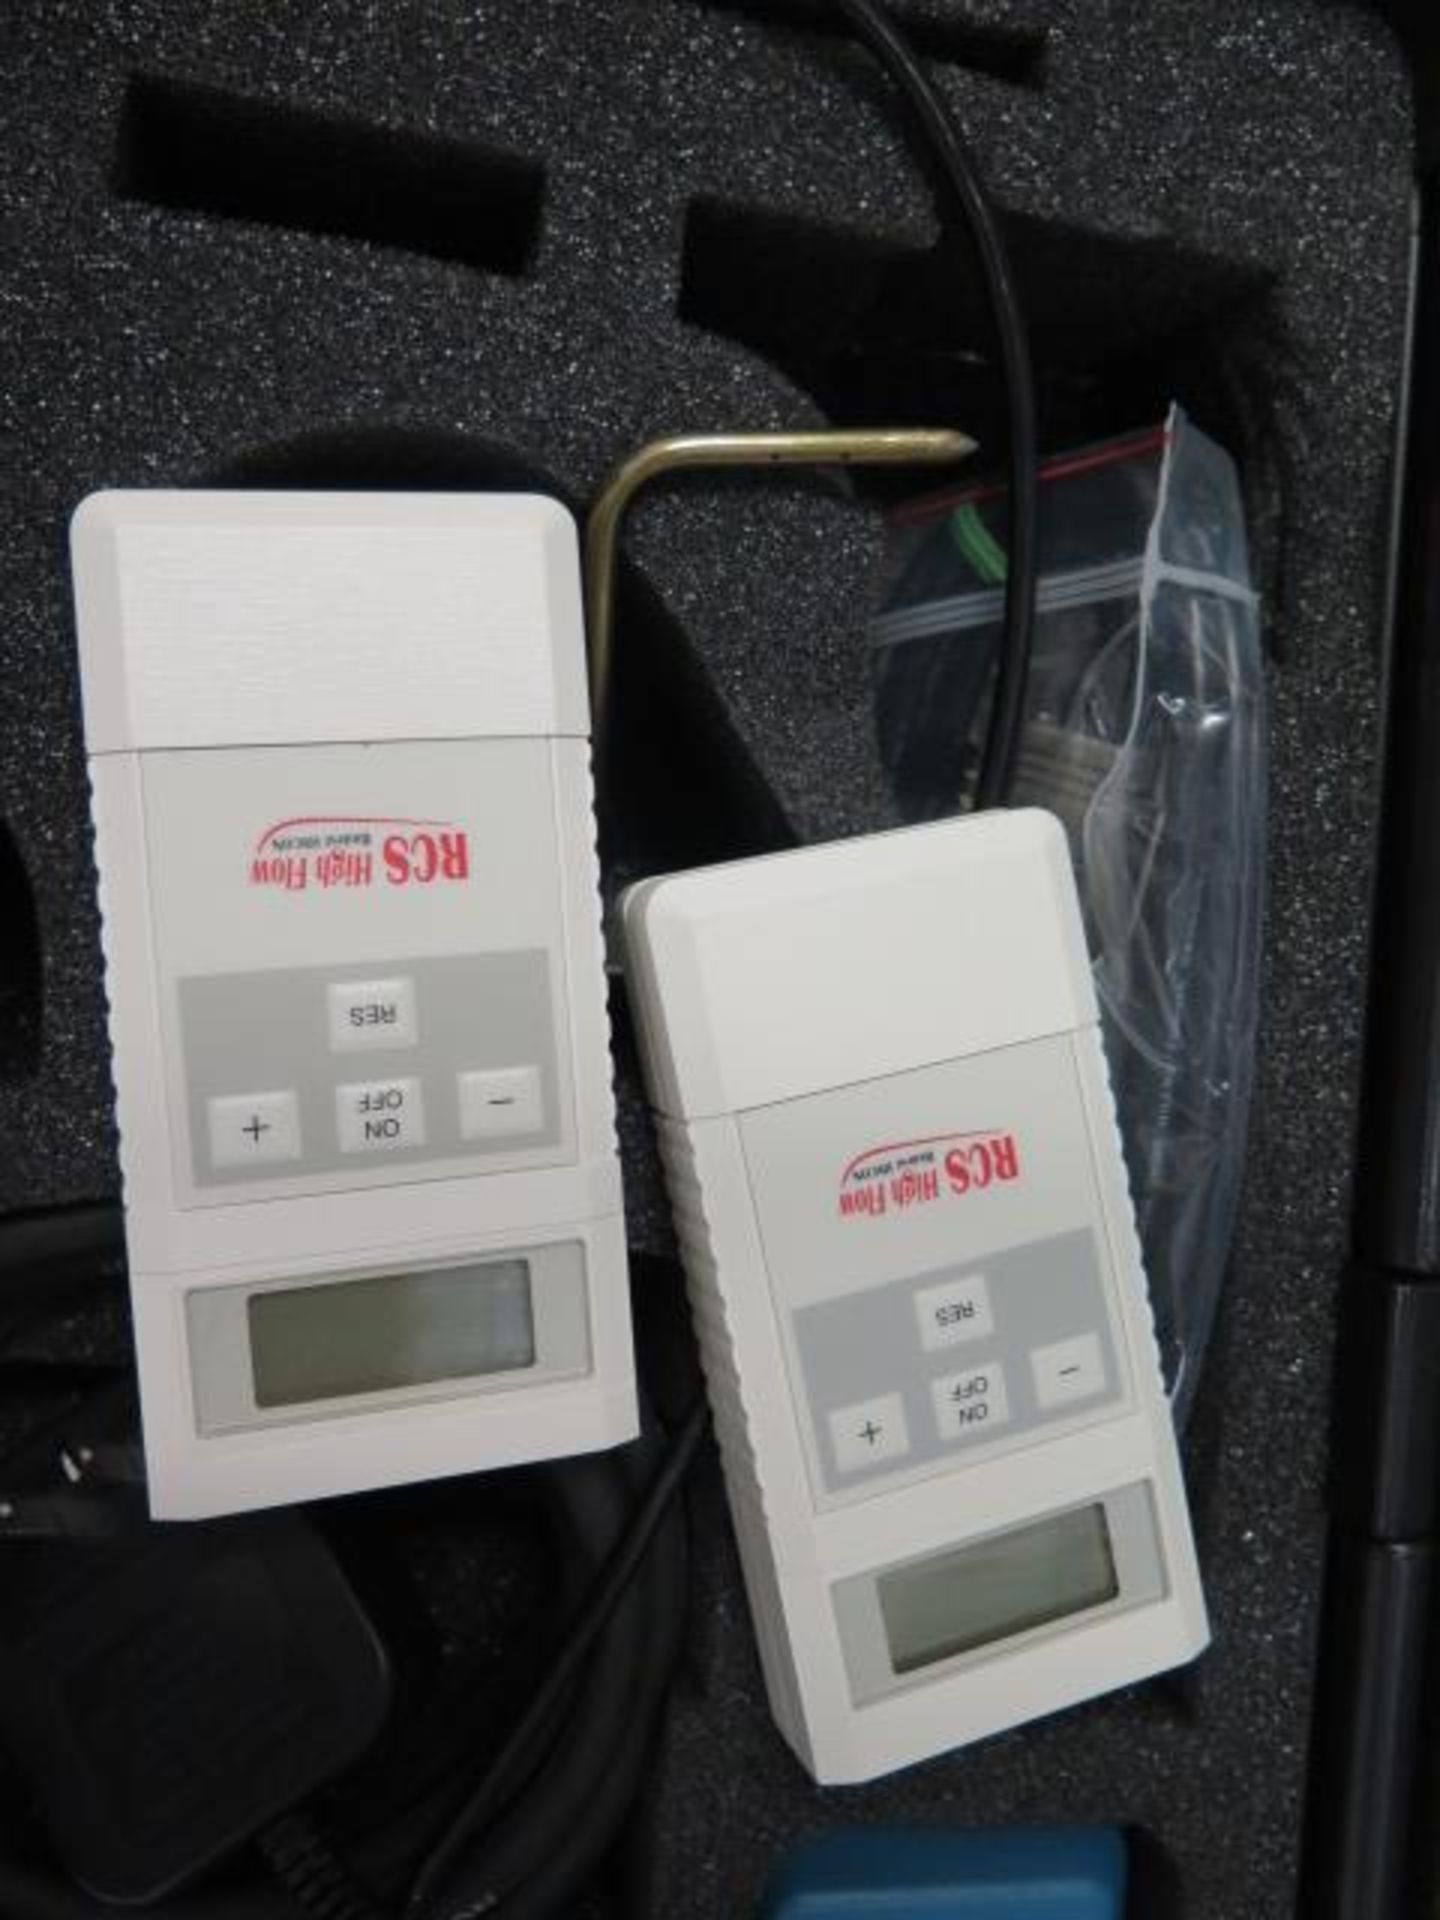 TSI mdl. 8386 “Velociale Plus” Air Velocity Meter (SOLD AS-IS - NO WARRANTY) - Image 4 of 5